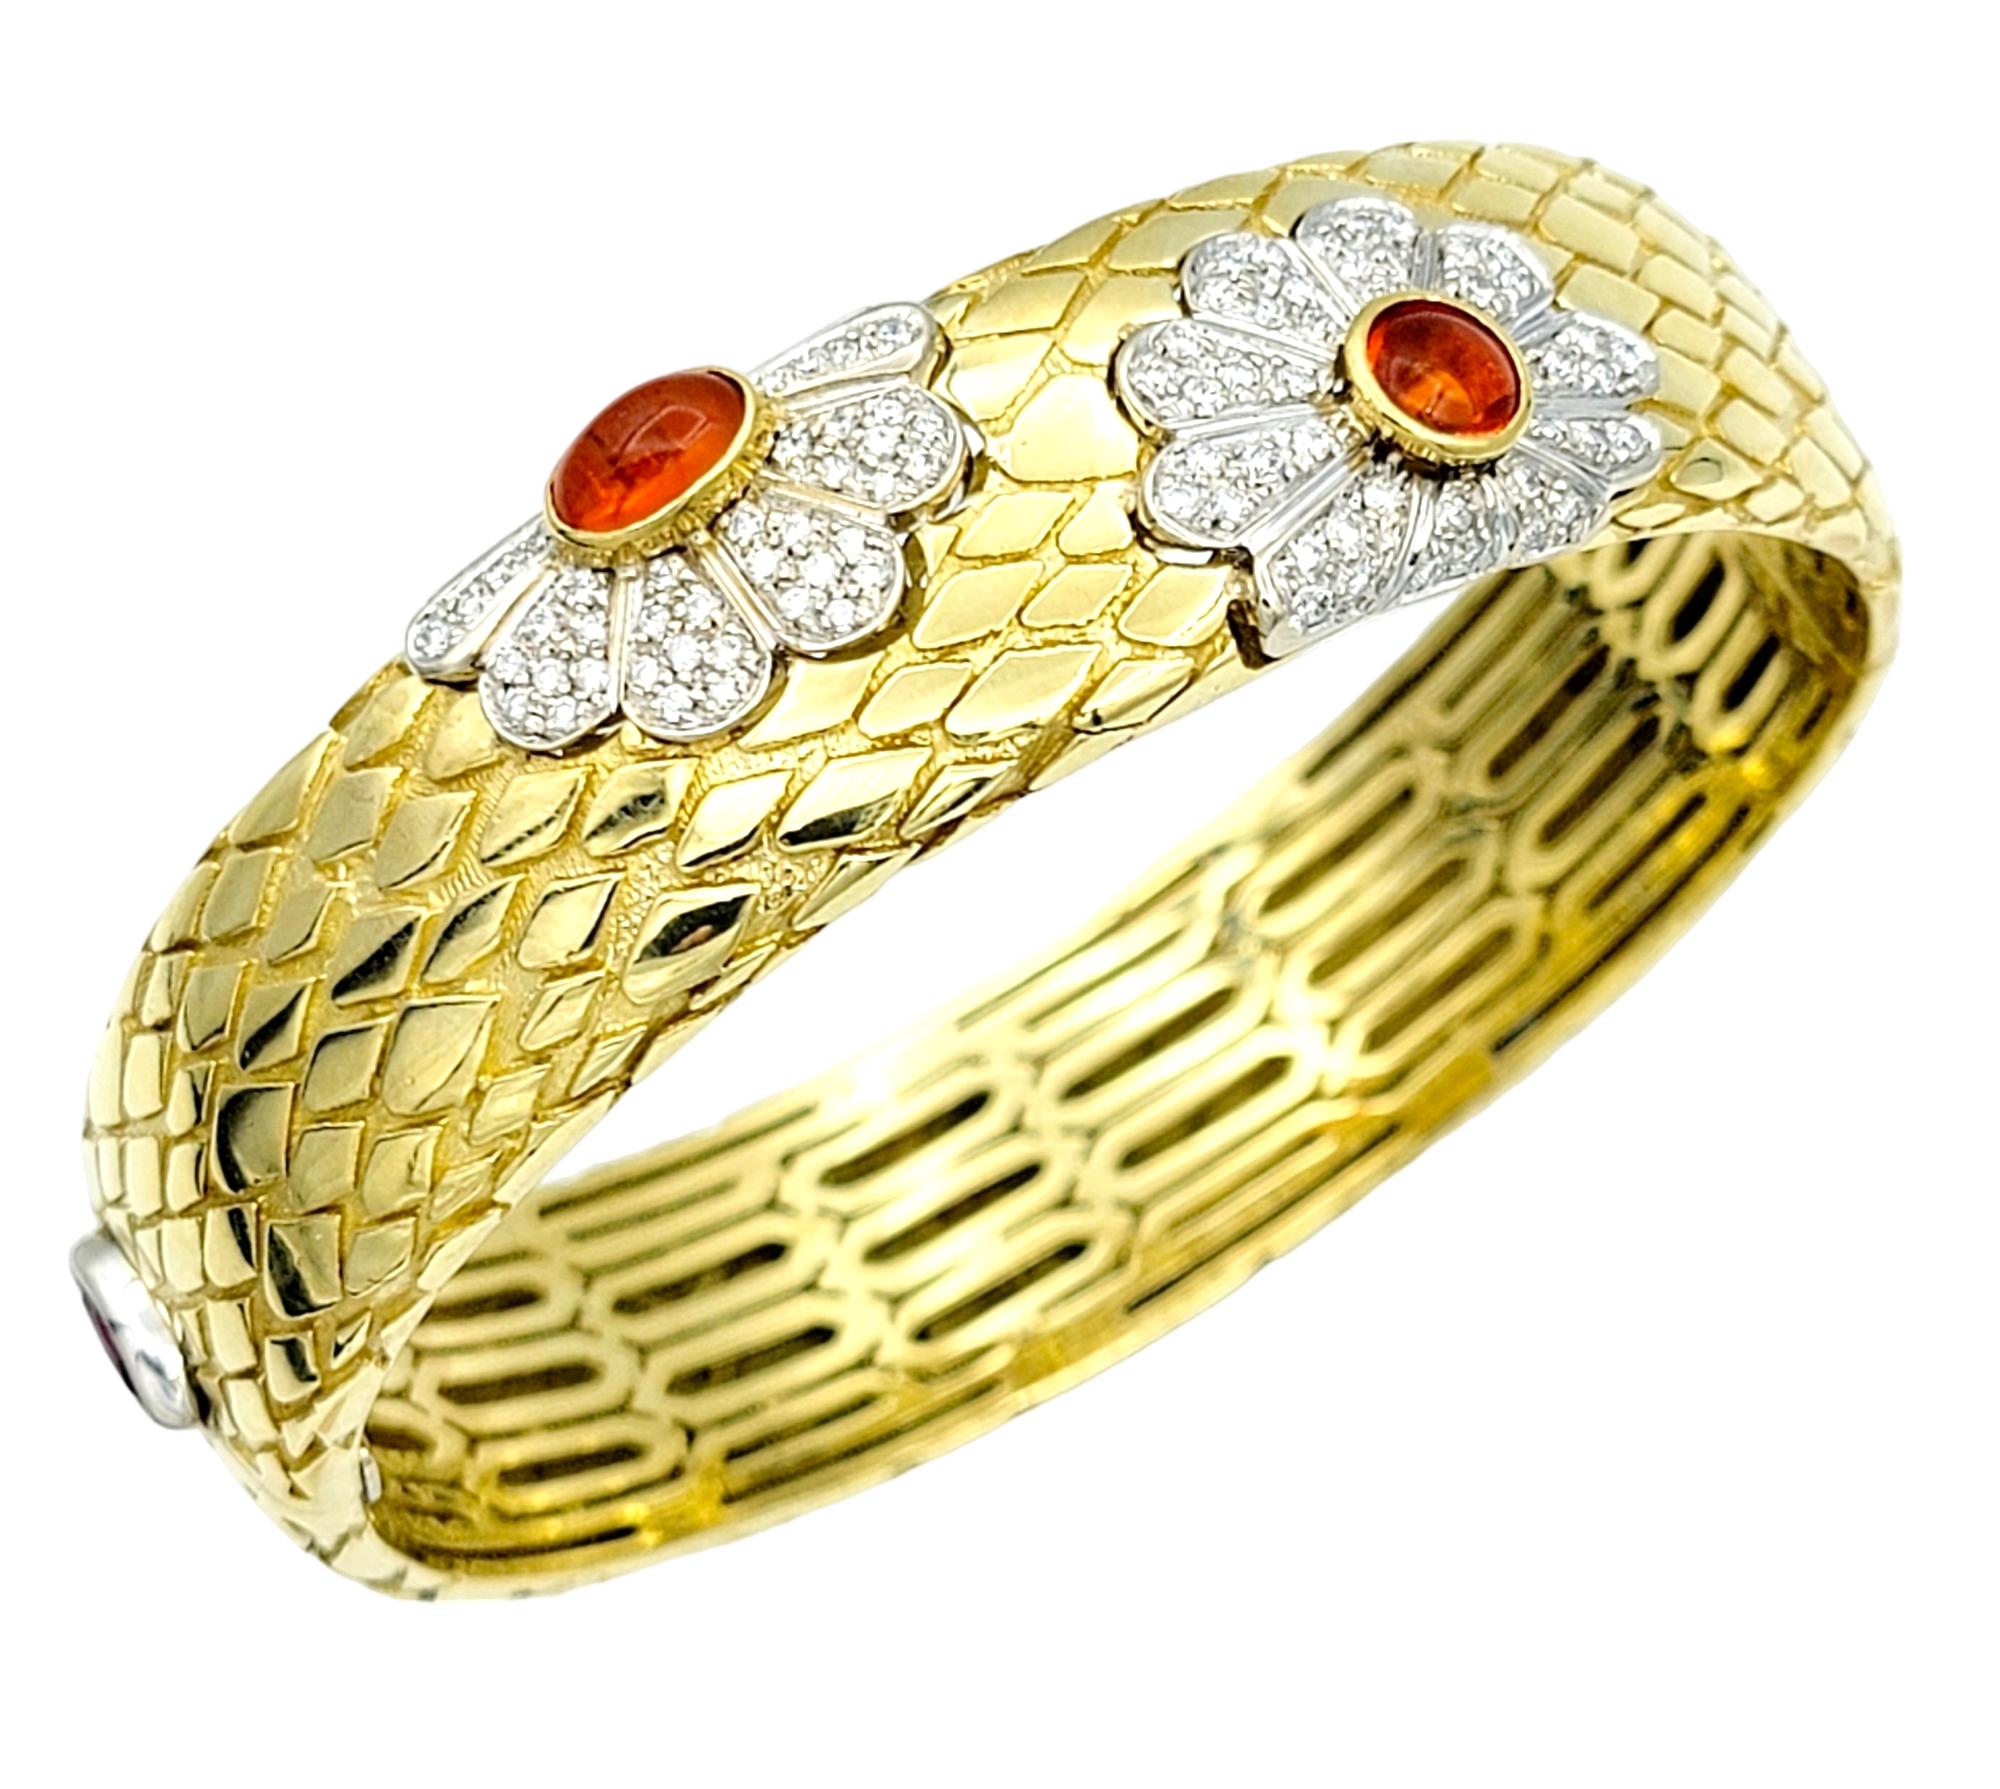 Roberto Coin Gold Snakeskin Bangle Bracelet with Fire Opal and Diamond Flowers For Sale